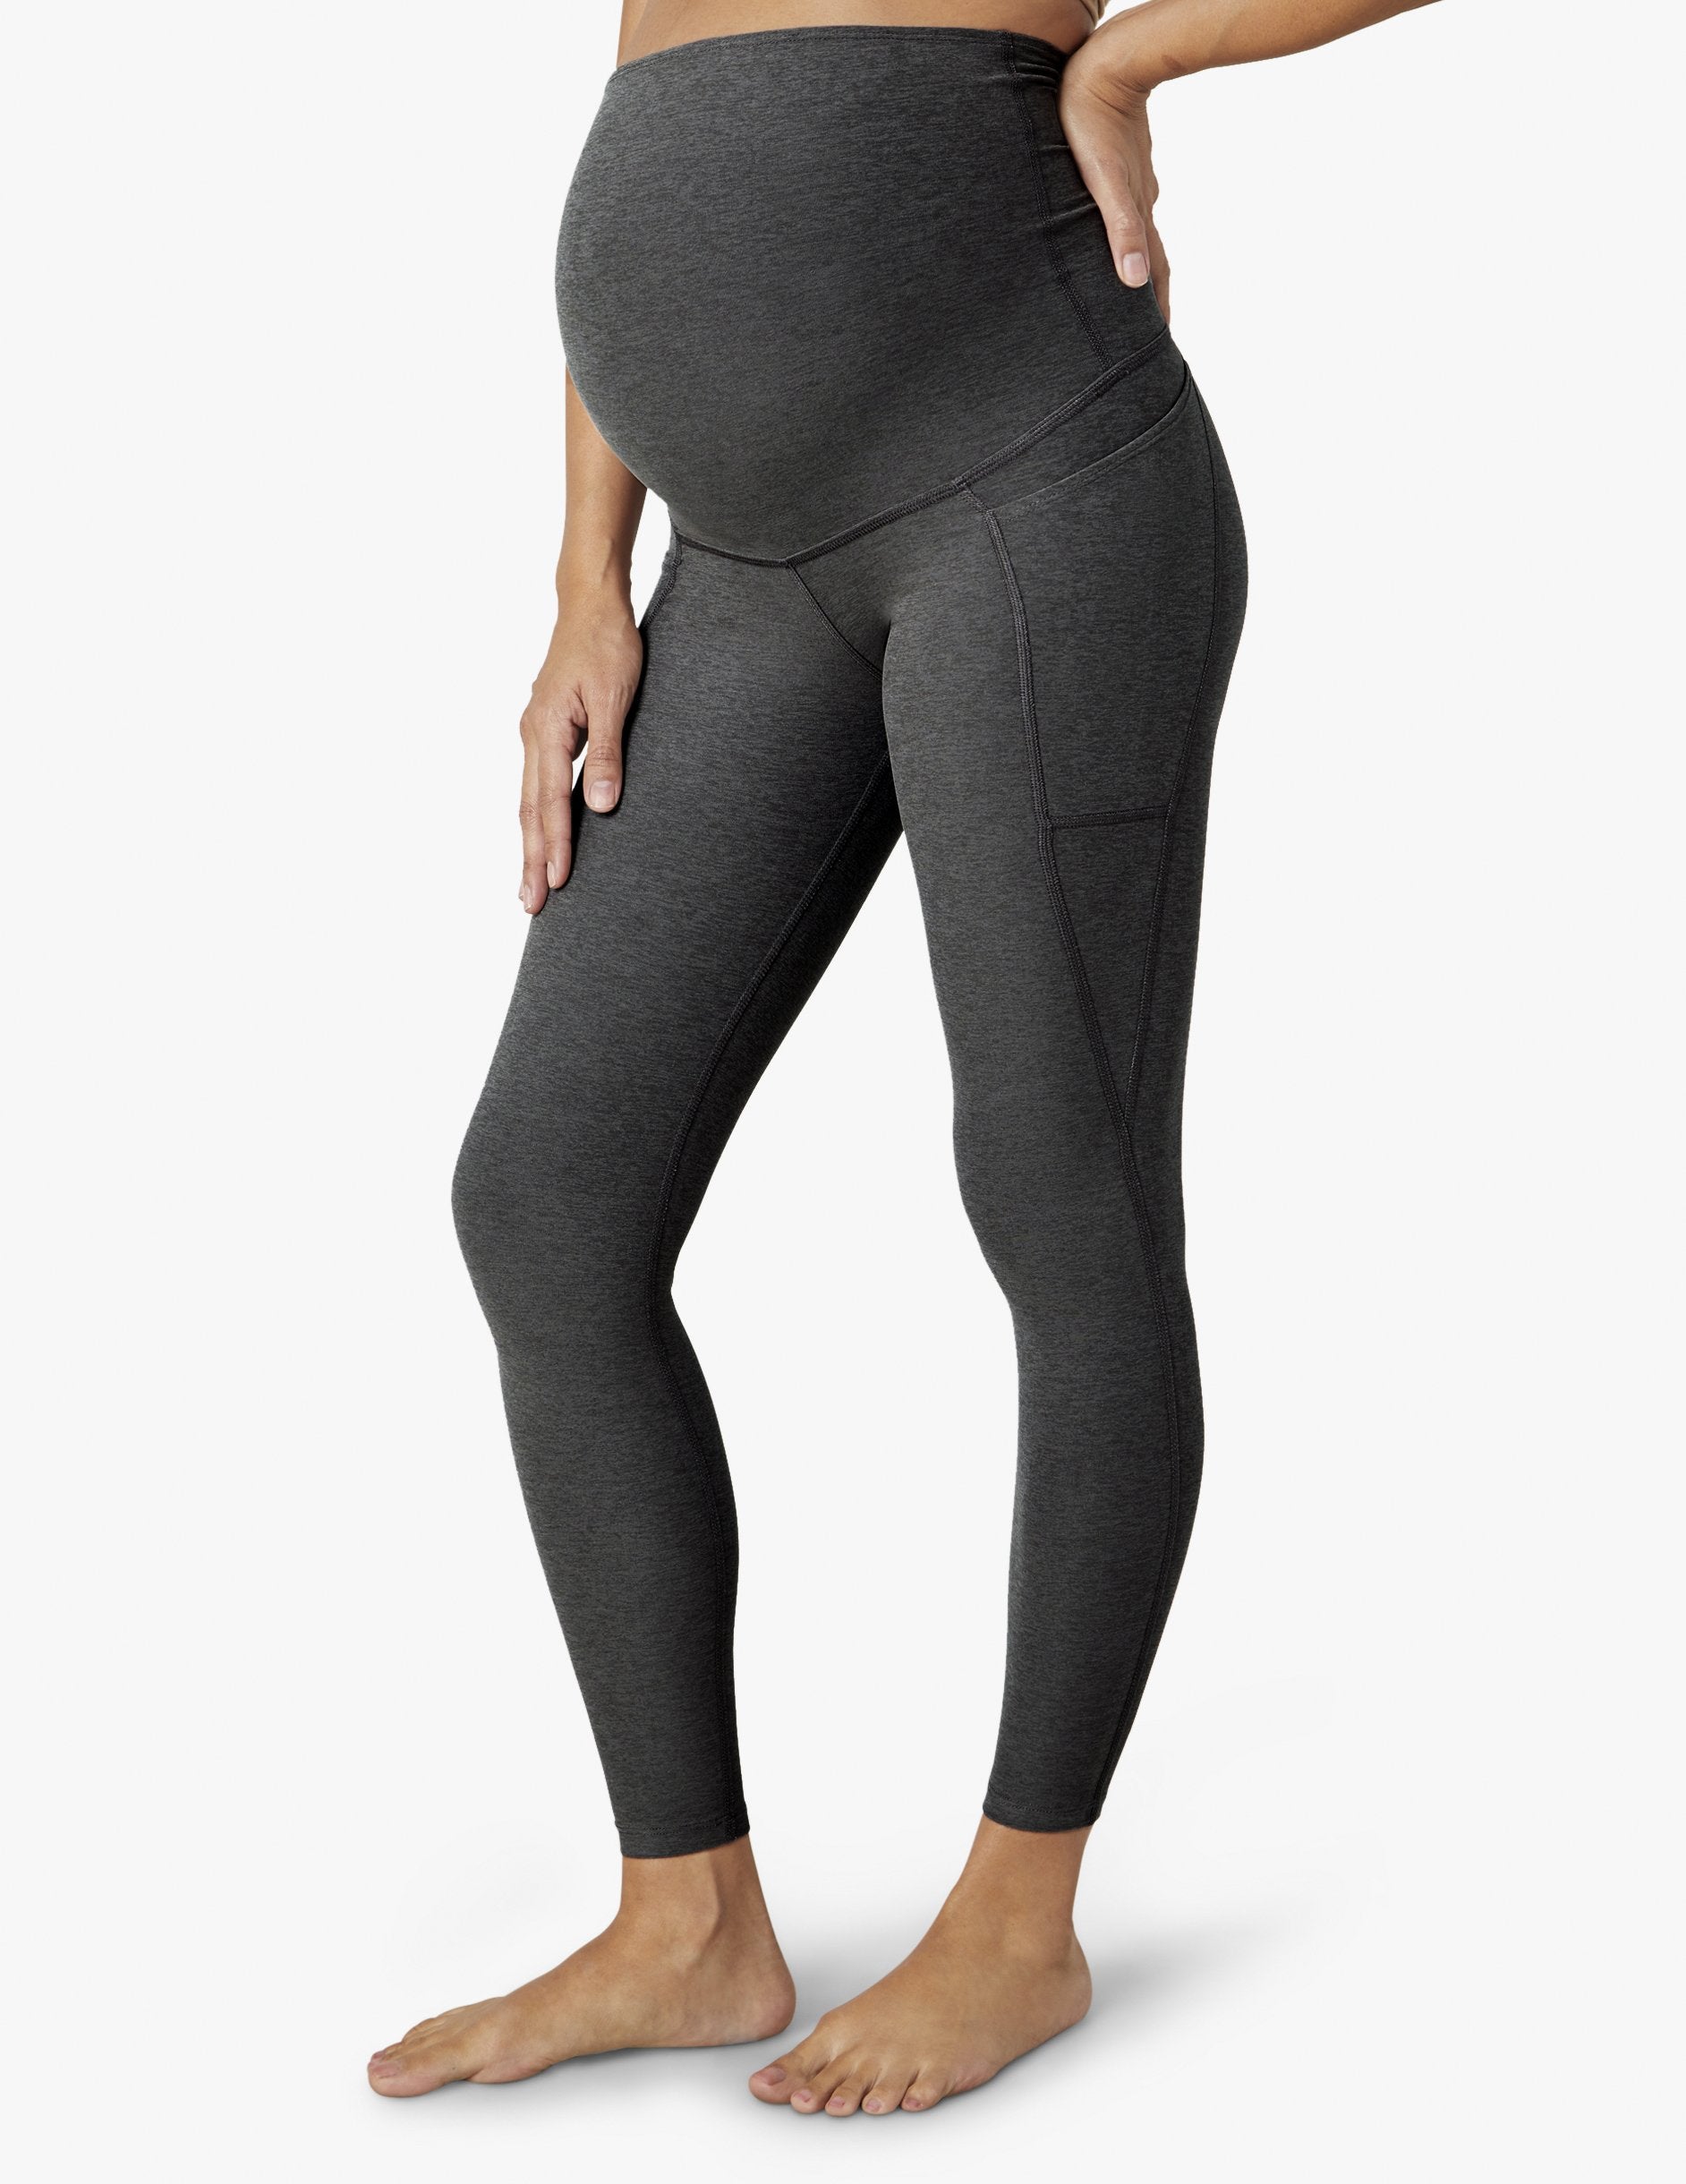 Cozy Fleece Maternity Ankle Pant (Black) – Carry Maternity Canada